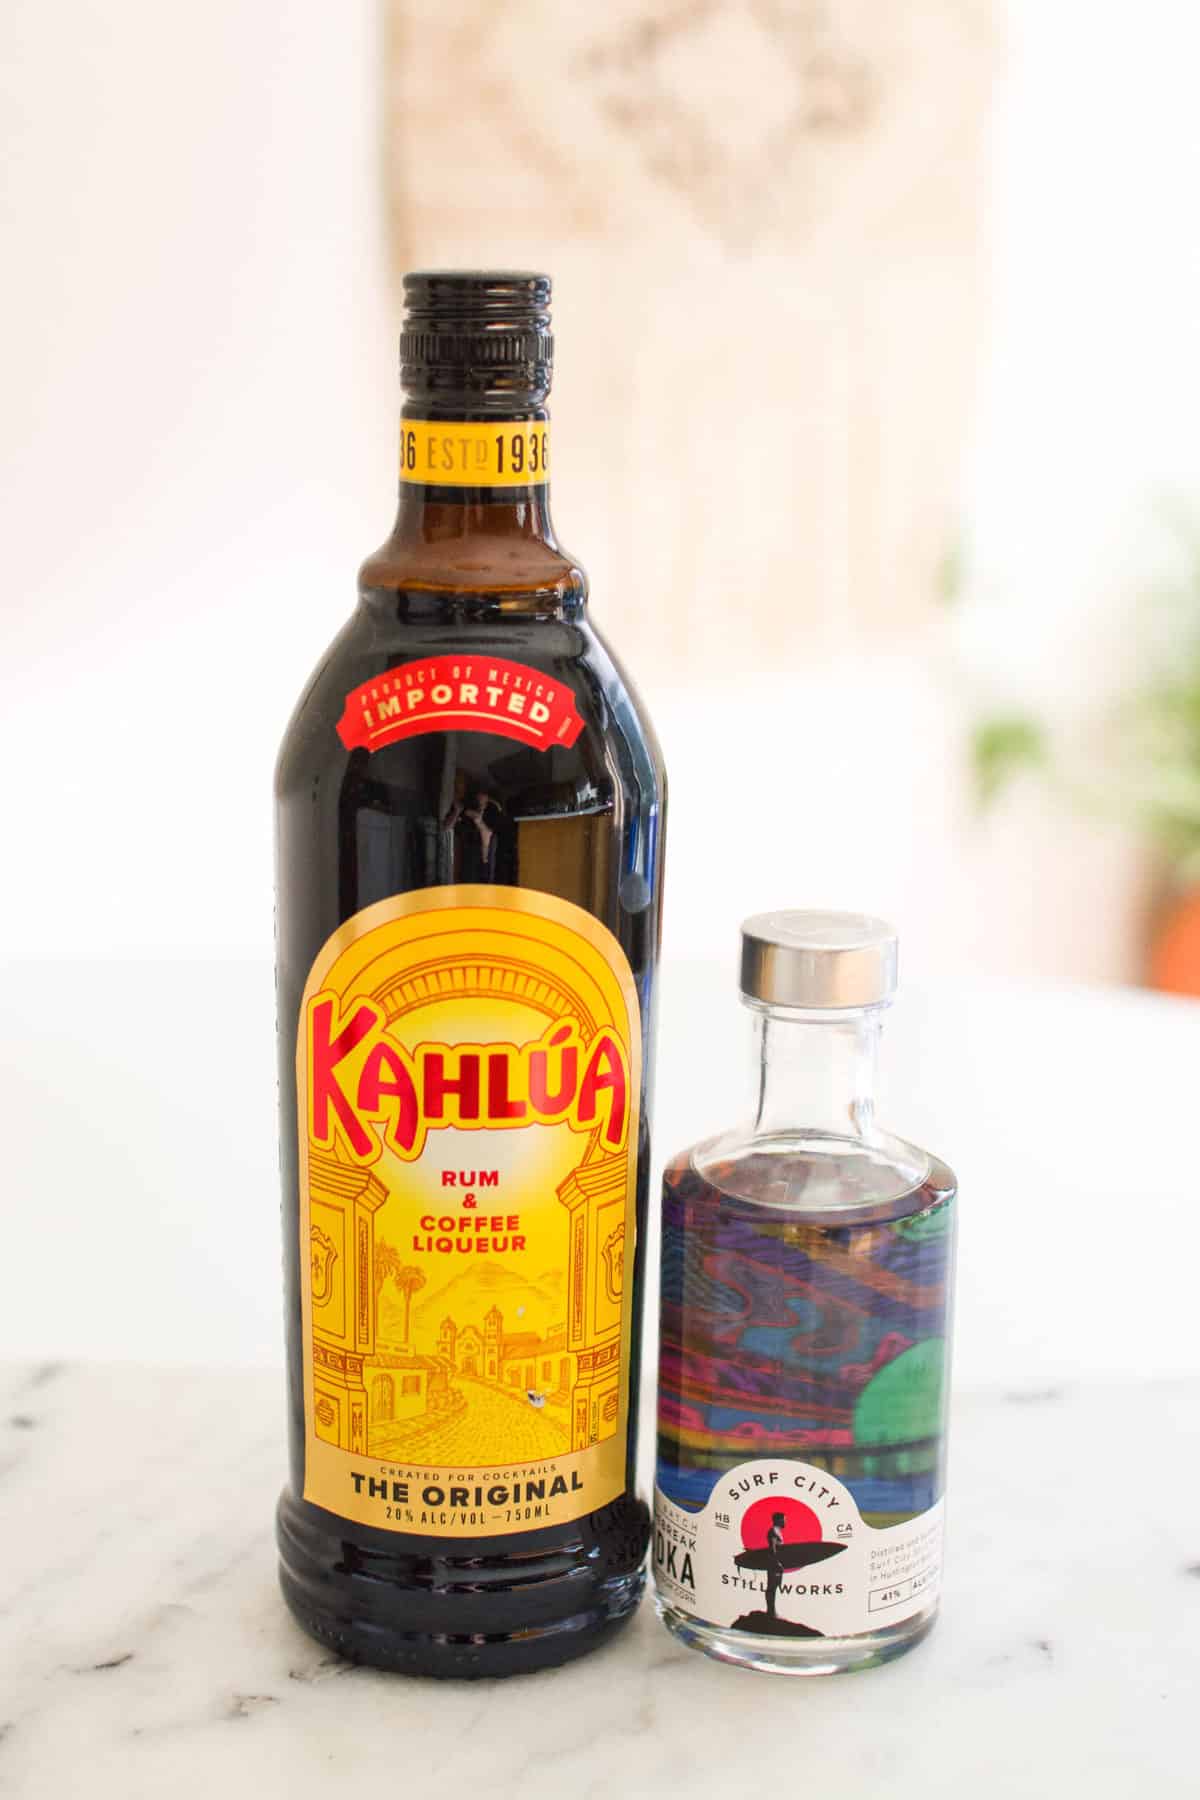 A bottle of Kahlua and vodka on a counter to make a Black Russian cocktail.